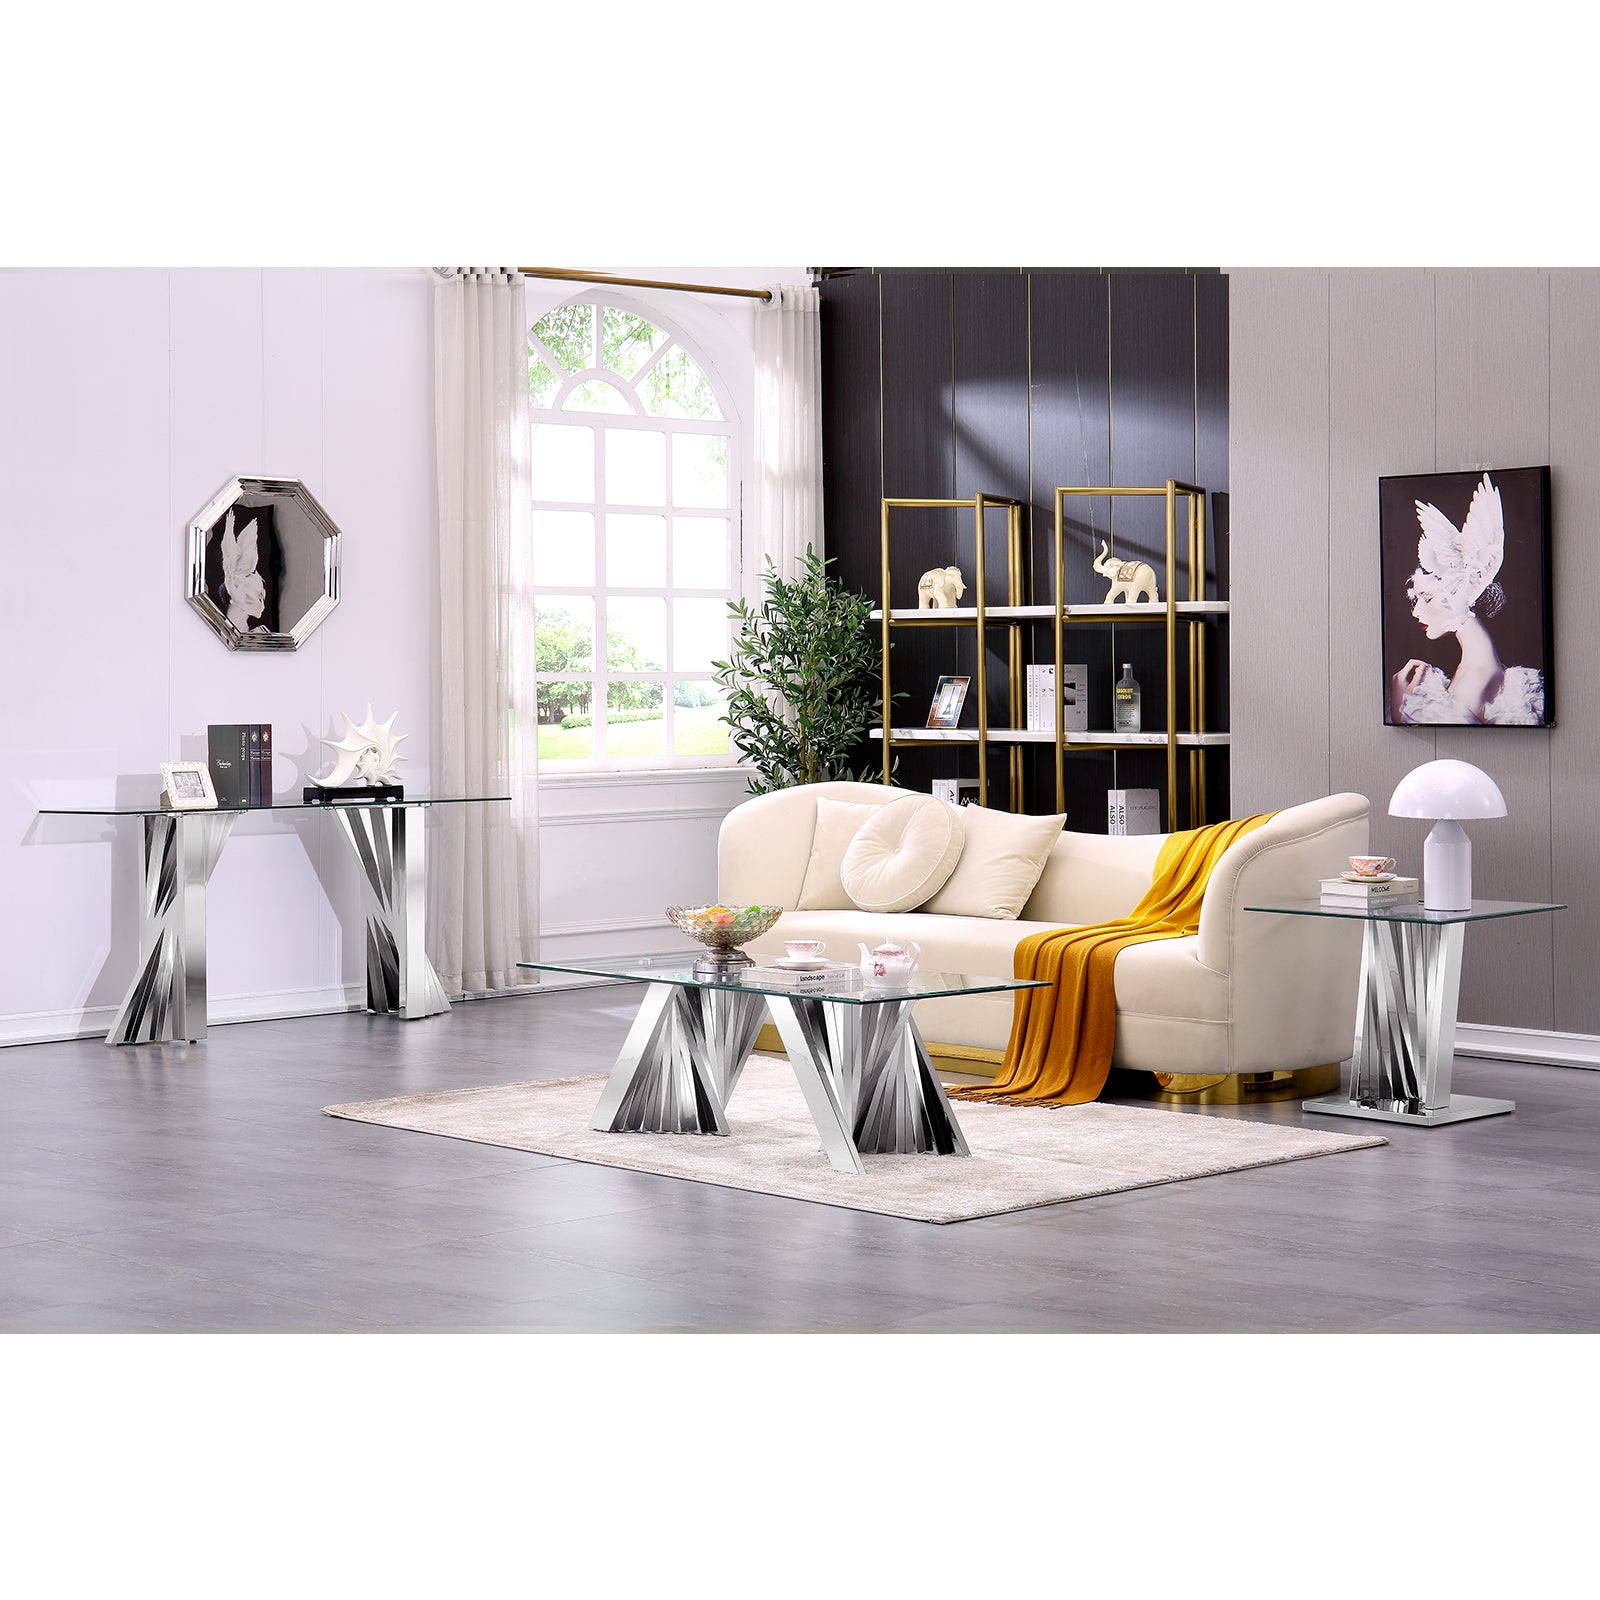 Silver Glass living room table set | Metal Scalloped Legs | L220